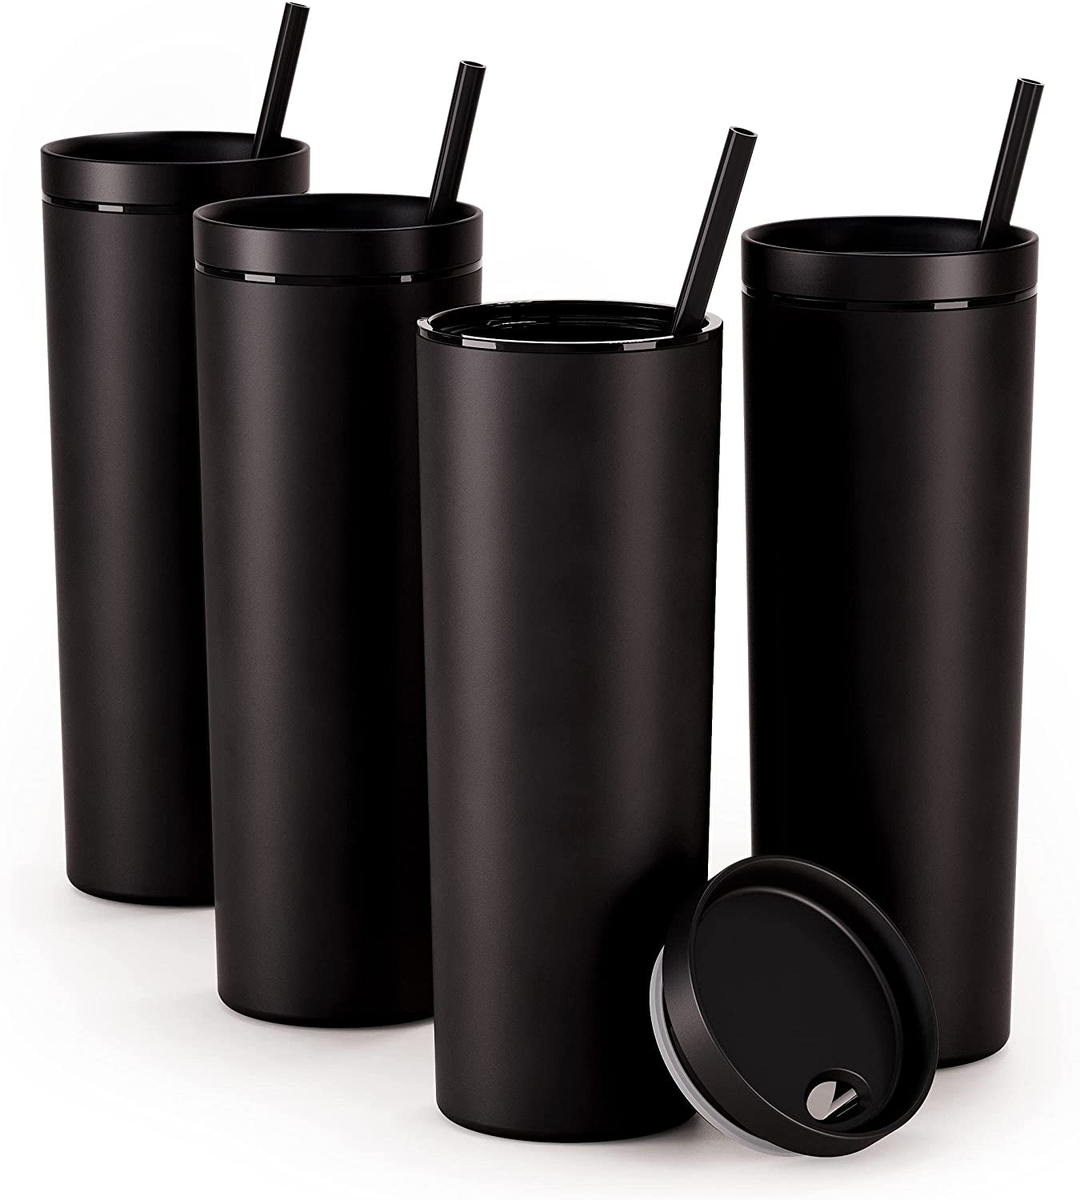 Maars Skinny Acrylic Tumbler with Lid and Straw | 18oz Premium Insulated Double Wall Plastic Reusable Cups - Matte Black/Rose Gold, 4 Pack